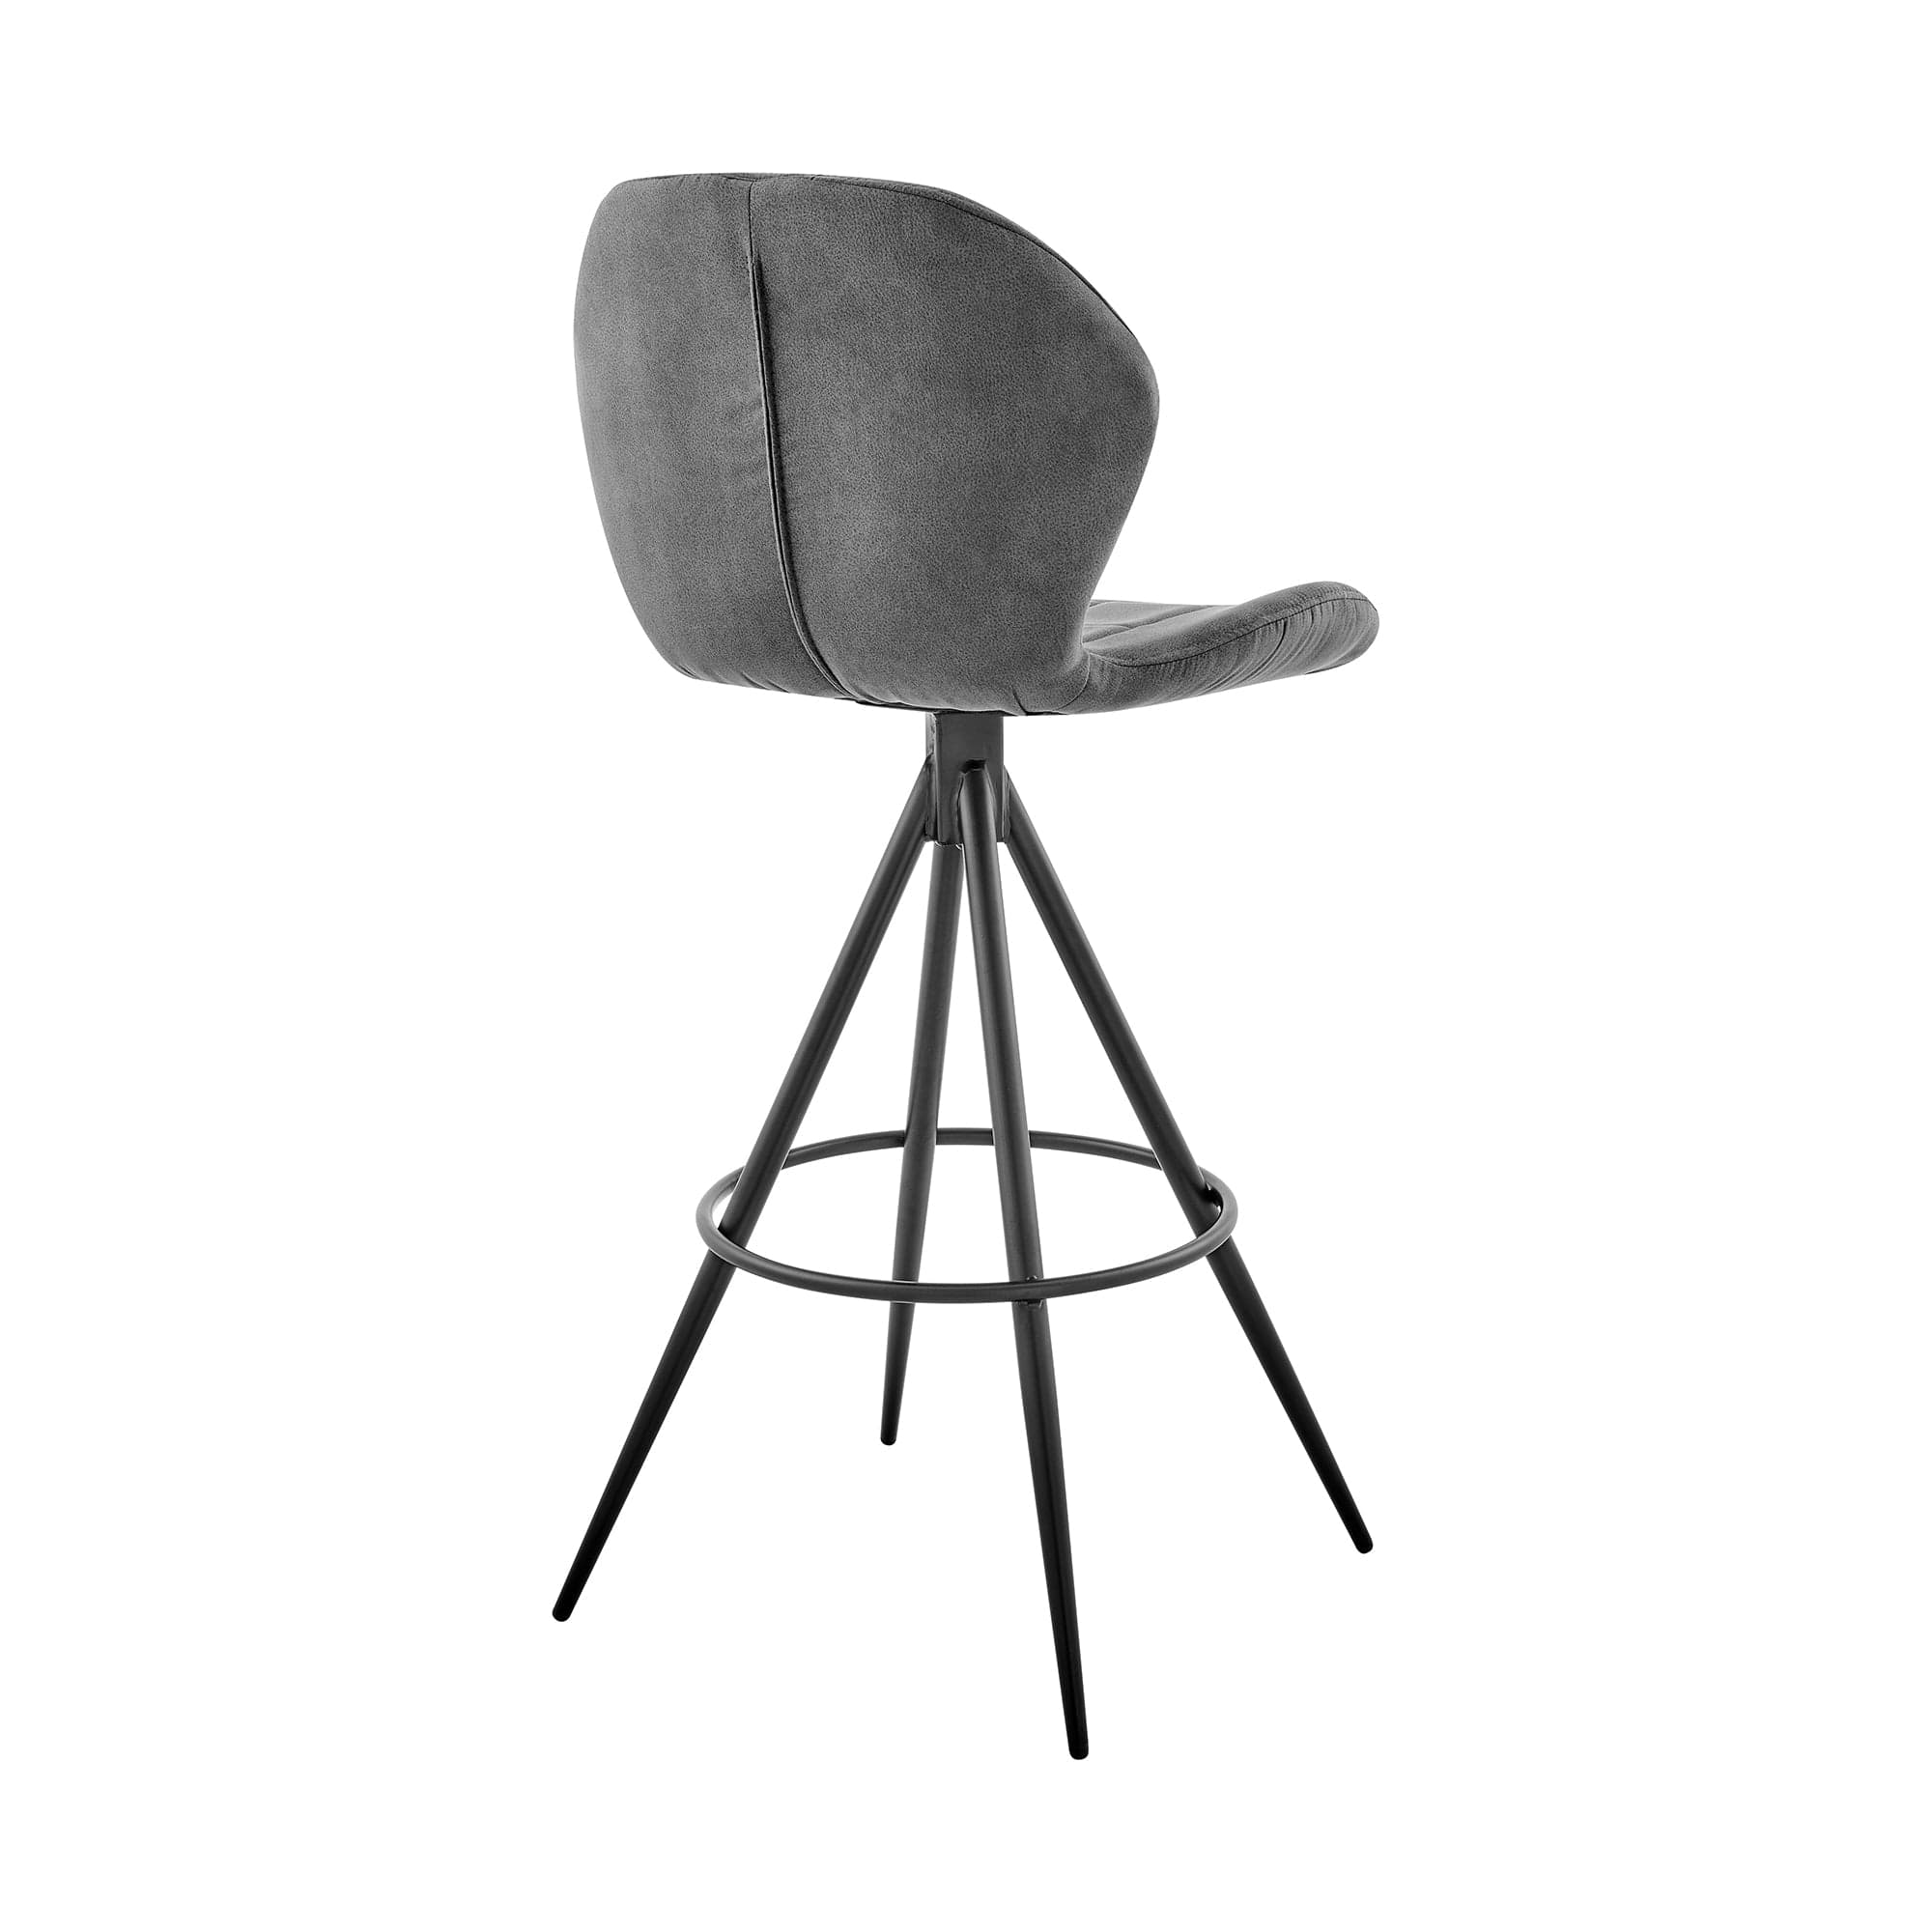 Armen Living Barstool Charcoal Fabric and Black Finish Armen Living - Catalina 26" Counter Height Bar Stool in Charcoal Fabric and Black Finish | LCCTBACH26